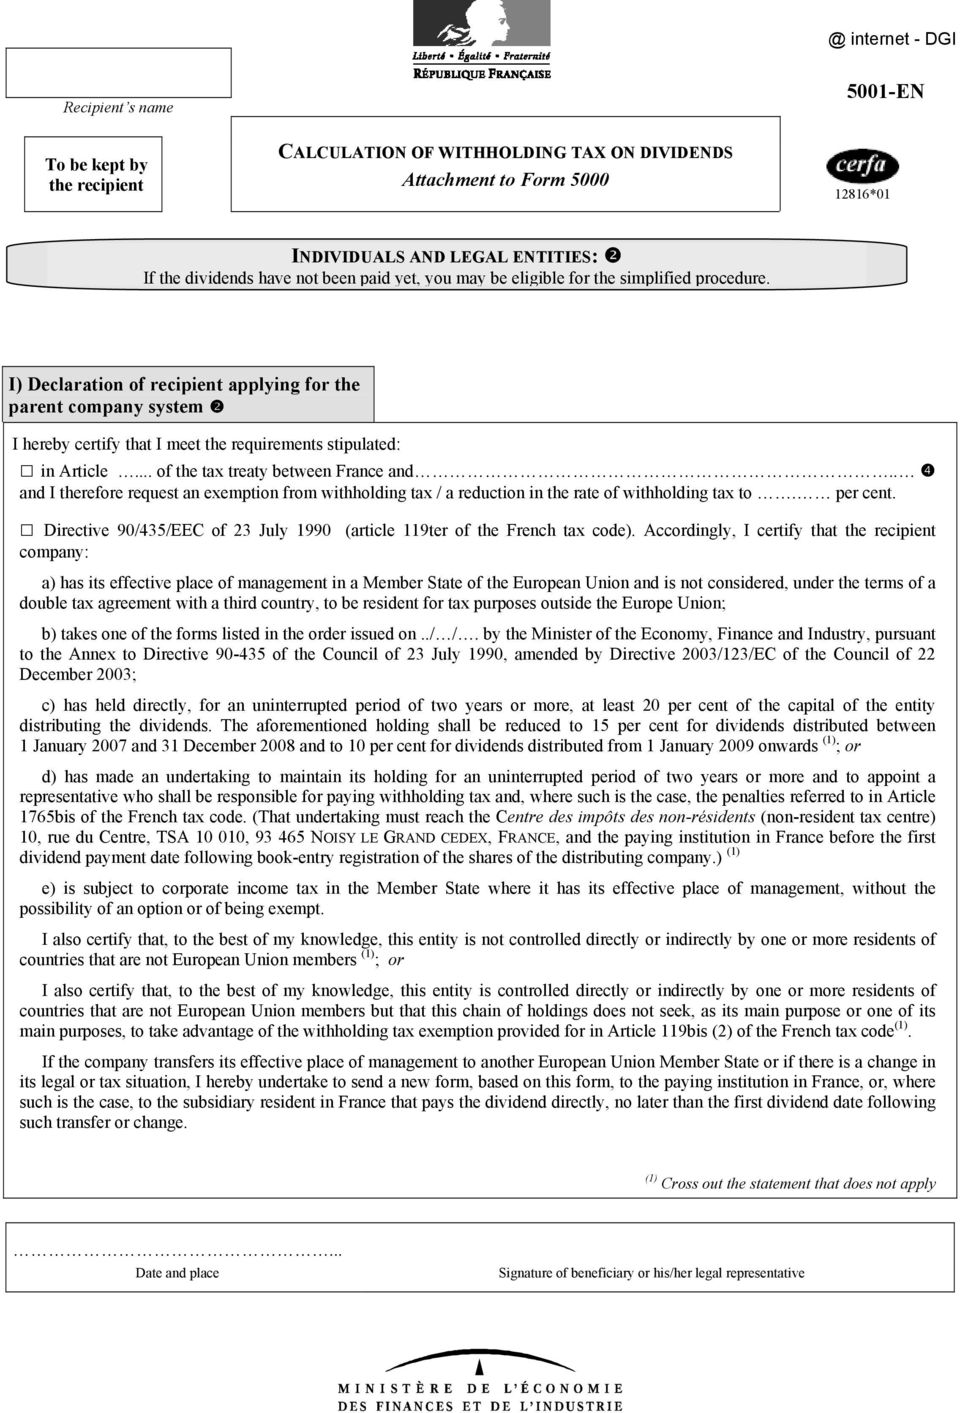 .. of the tax treaty between France and.. and I therefore request an exemption from withholding tax / a reduction in the rate of withholding tax to. per cent.